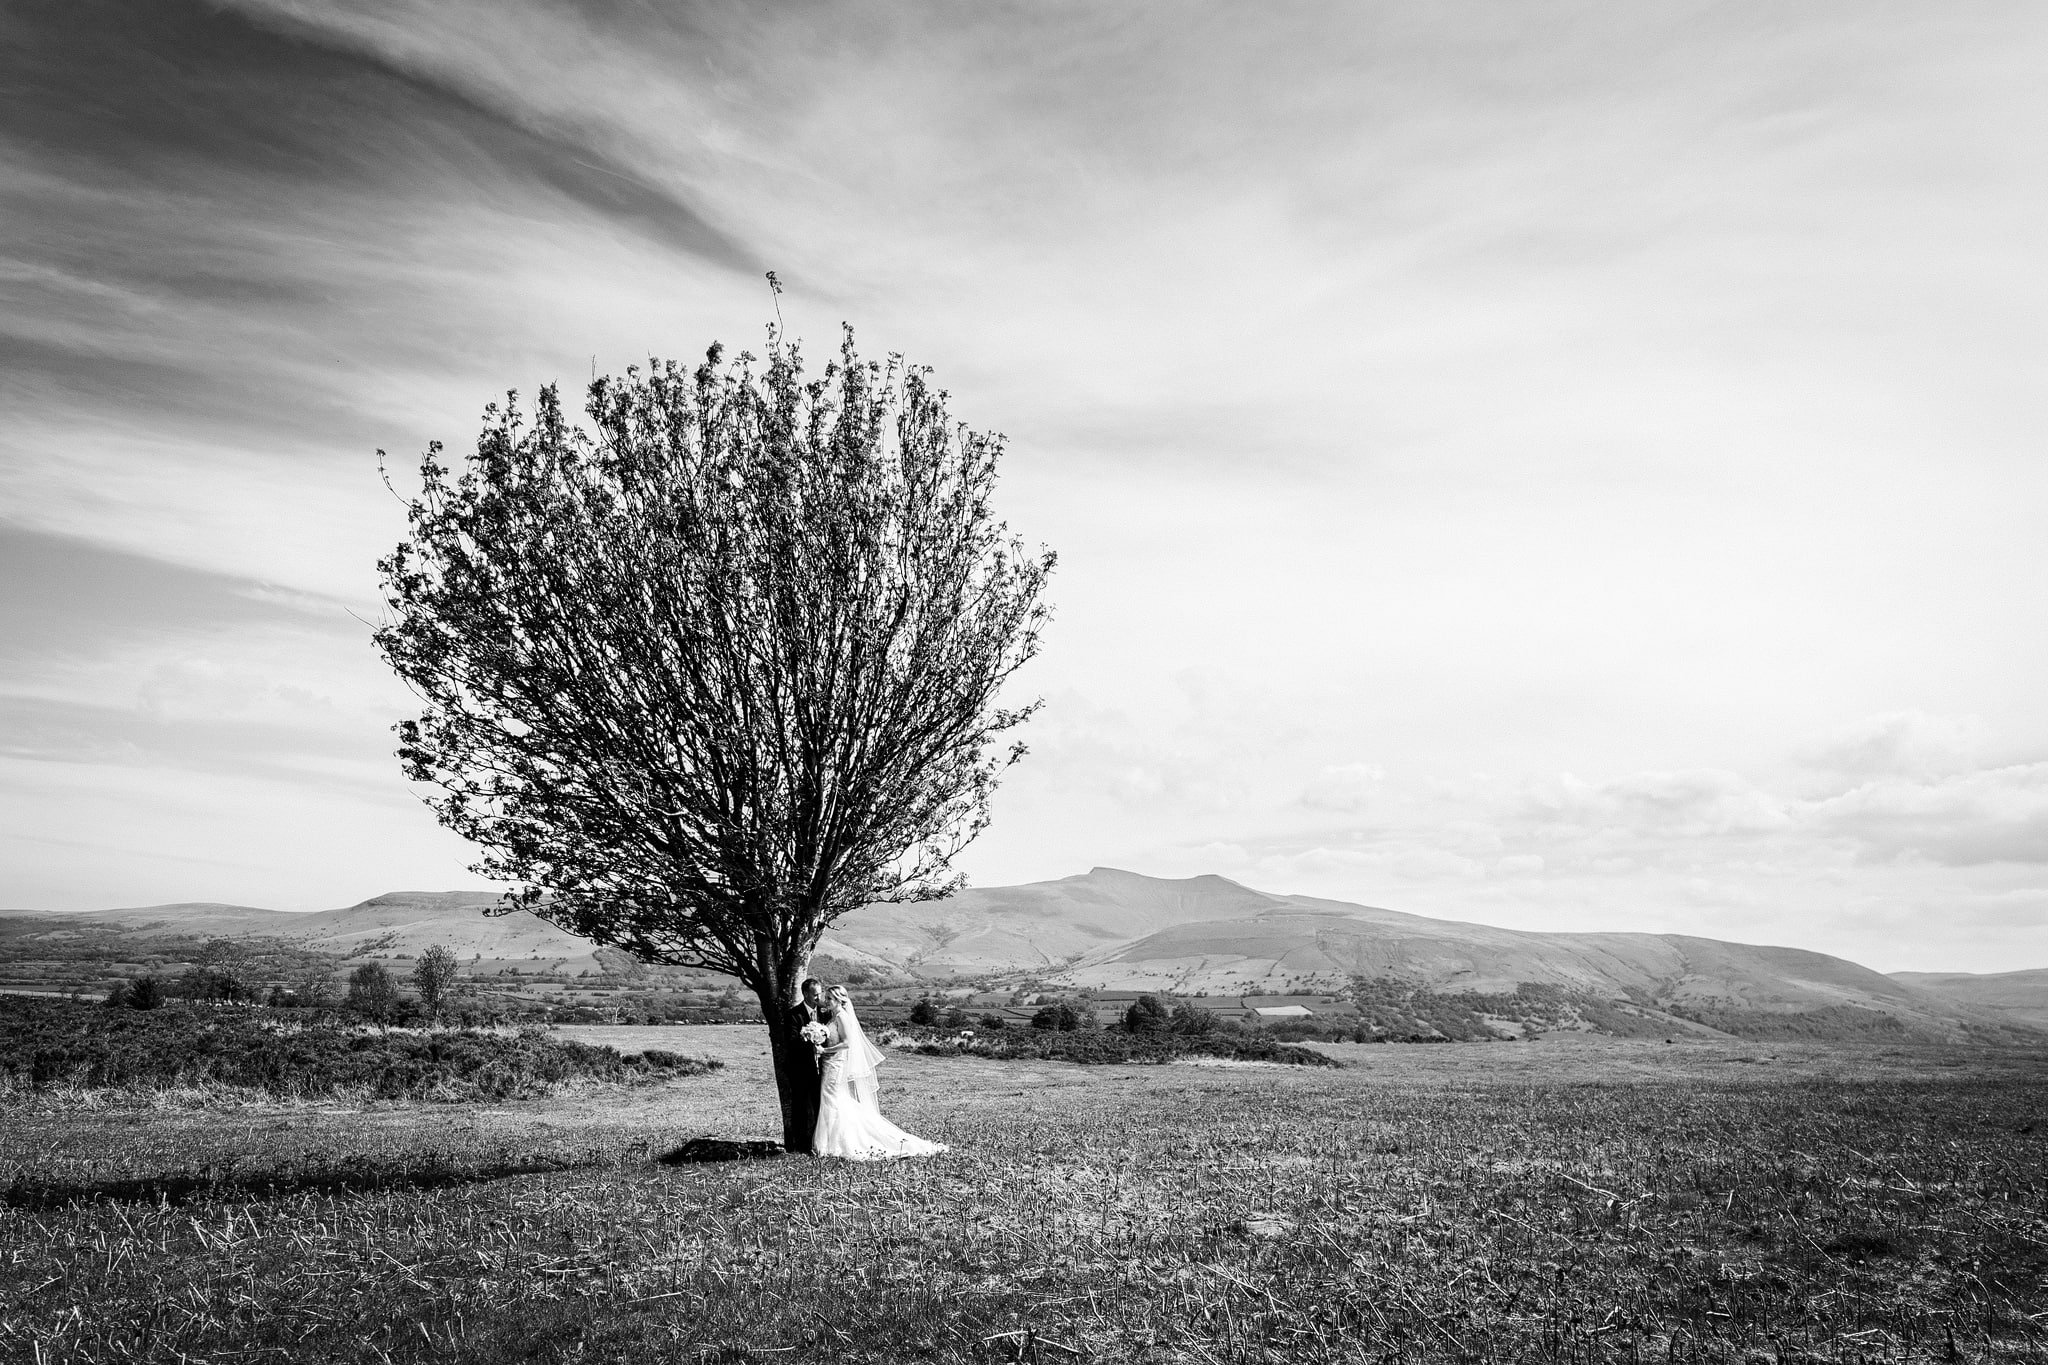 Bride and groom stood in front of tree with Brecon Beacons in background